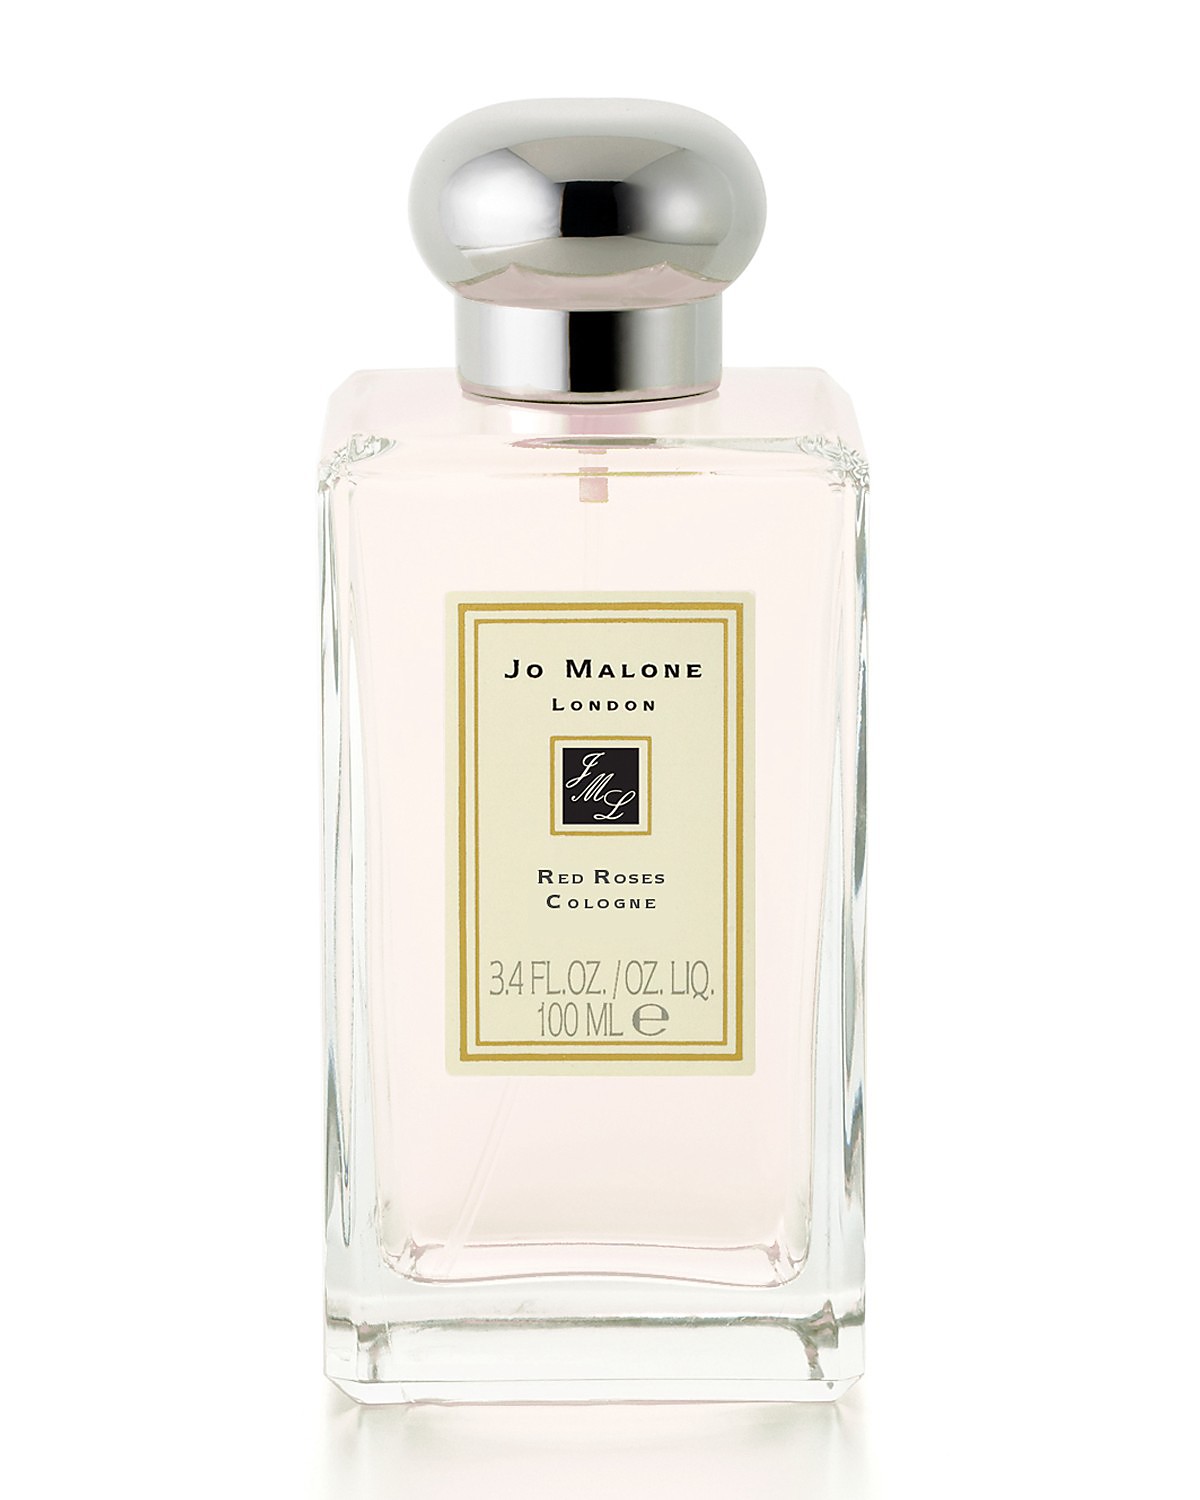 Breast Cancer charity Jo Malone red roses cologne.jpg